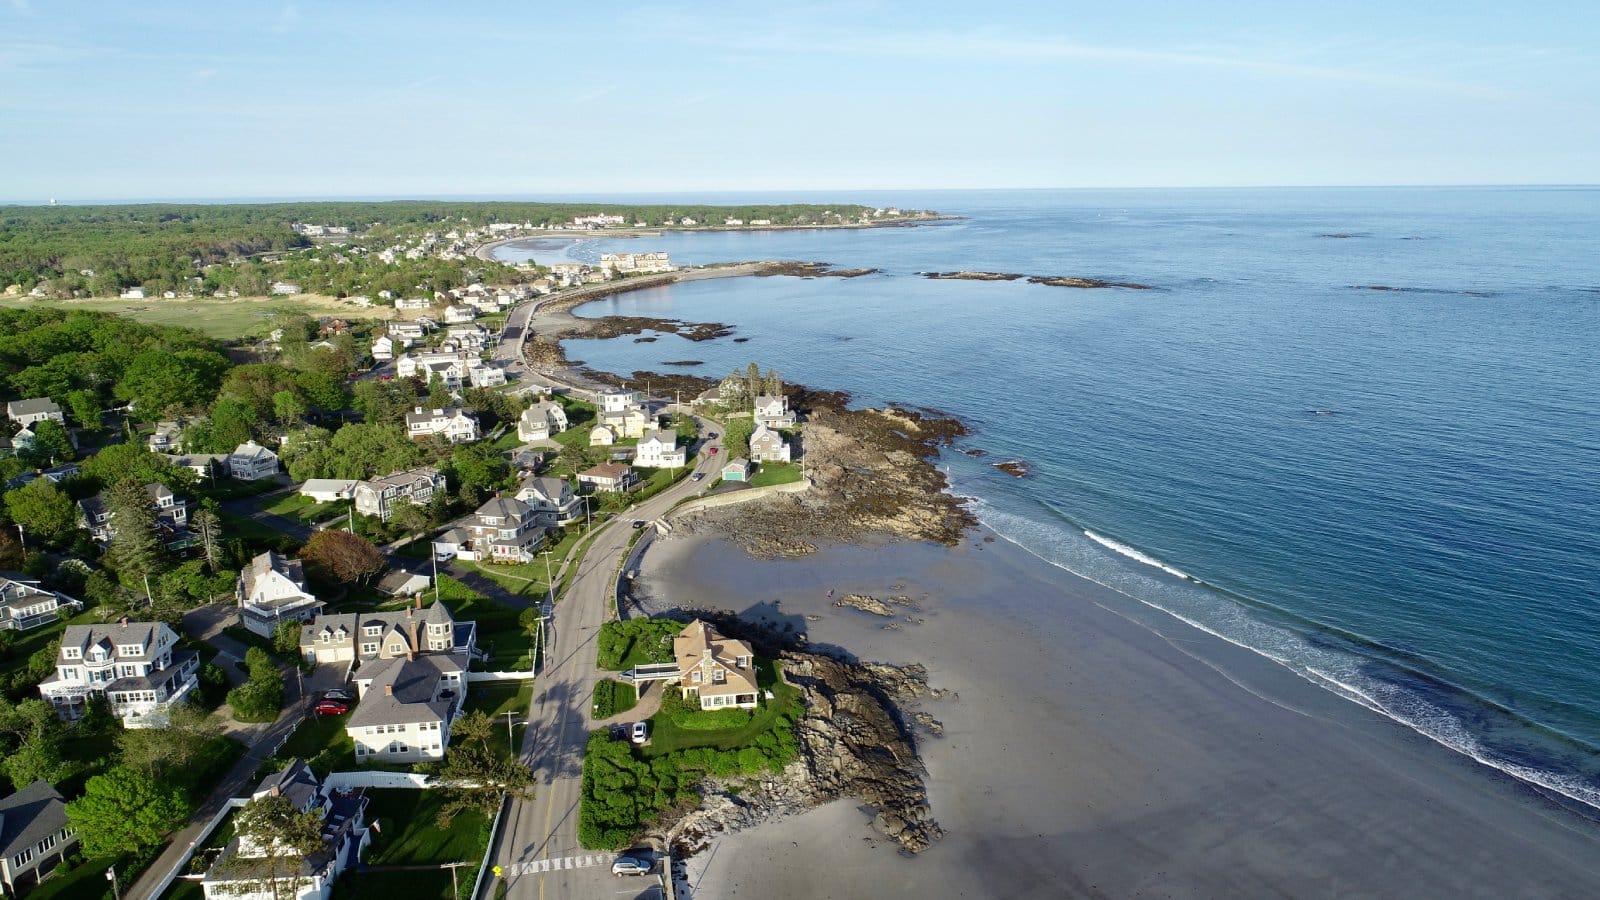 <p class="wp-caption-text">Image Credit: Shutterstock / Lewis Directed Films</p>  <p>Kennebunkport, with its charming streets and maritime heritage, is a must-visit for luxury seekers and beach lovers alike. Stay in exquisite resorts or cozy beachfront cottages, dine in upscale seafood restaurants, or explore the shops and galleries for a quintessentially Maine experience.</p>